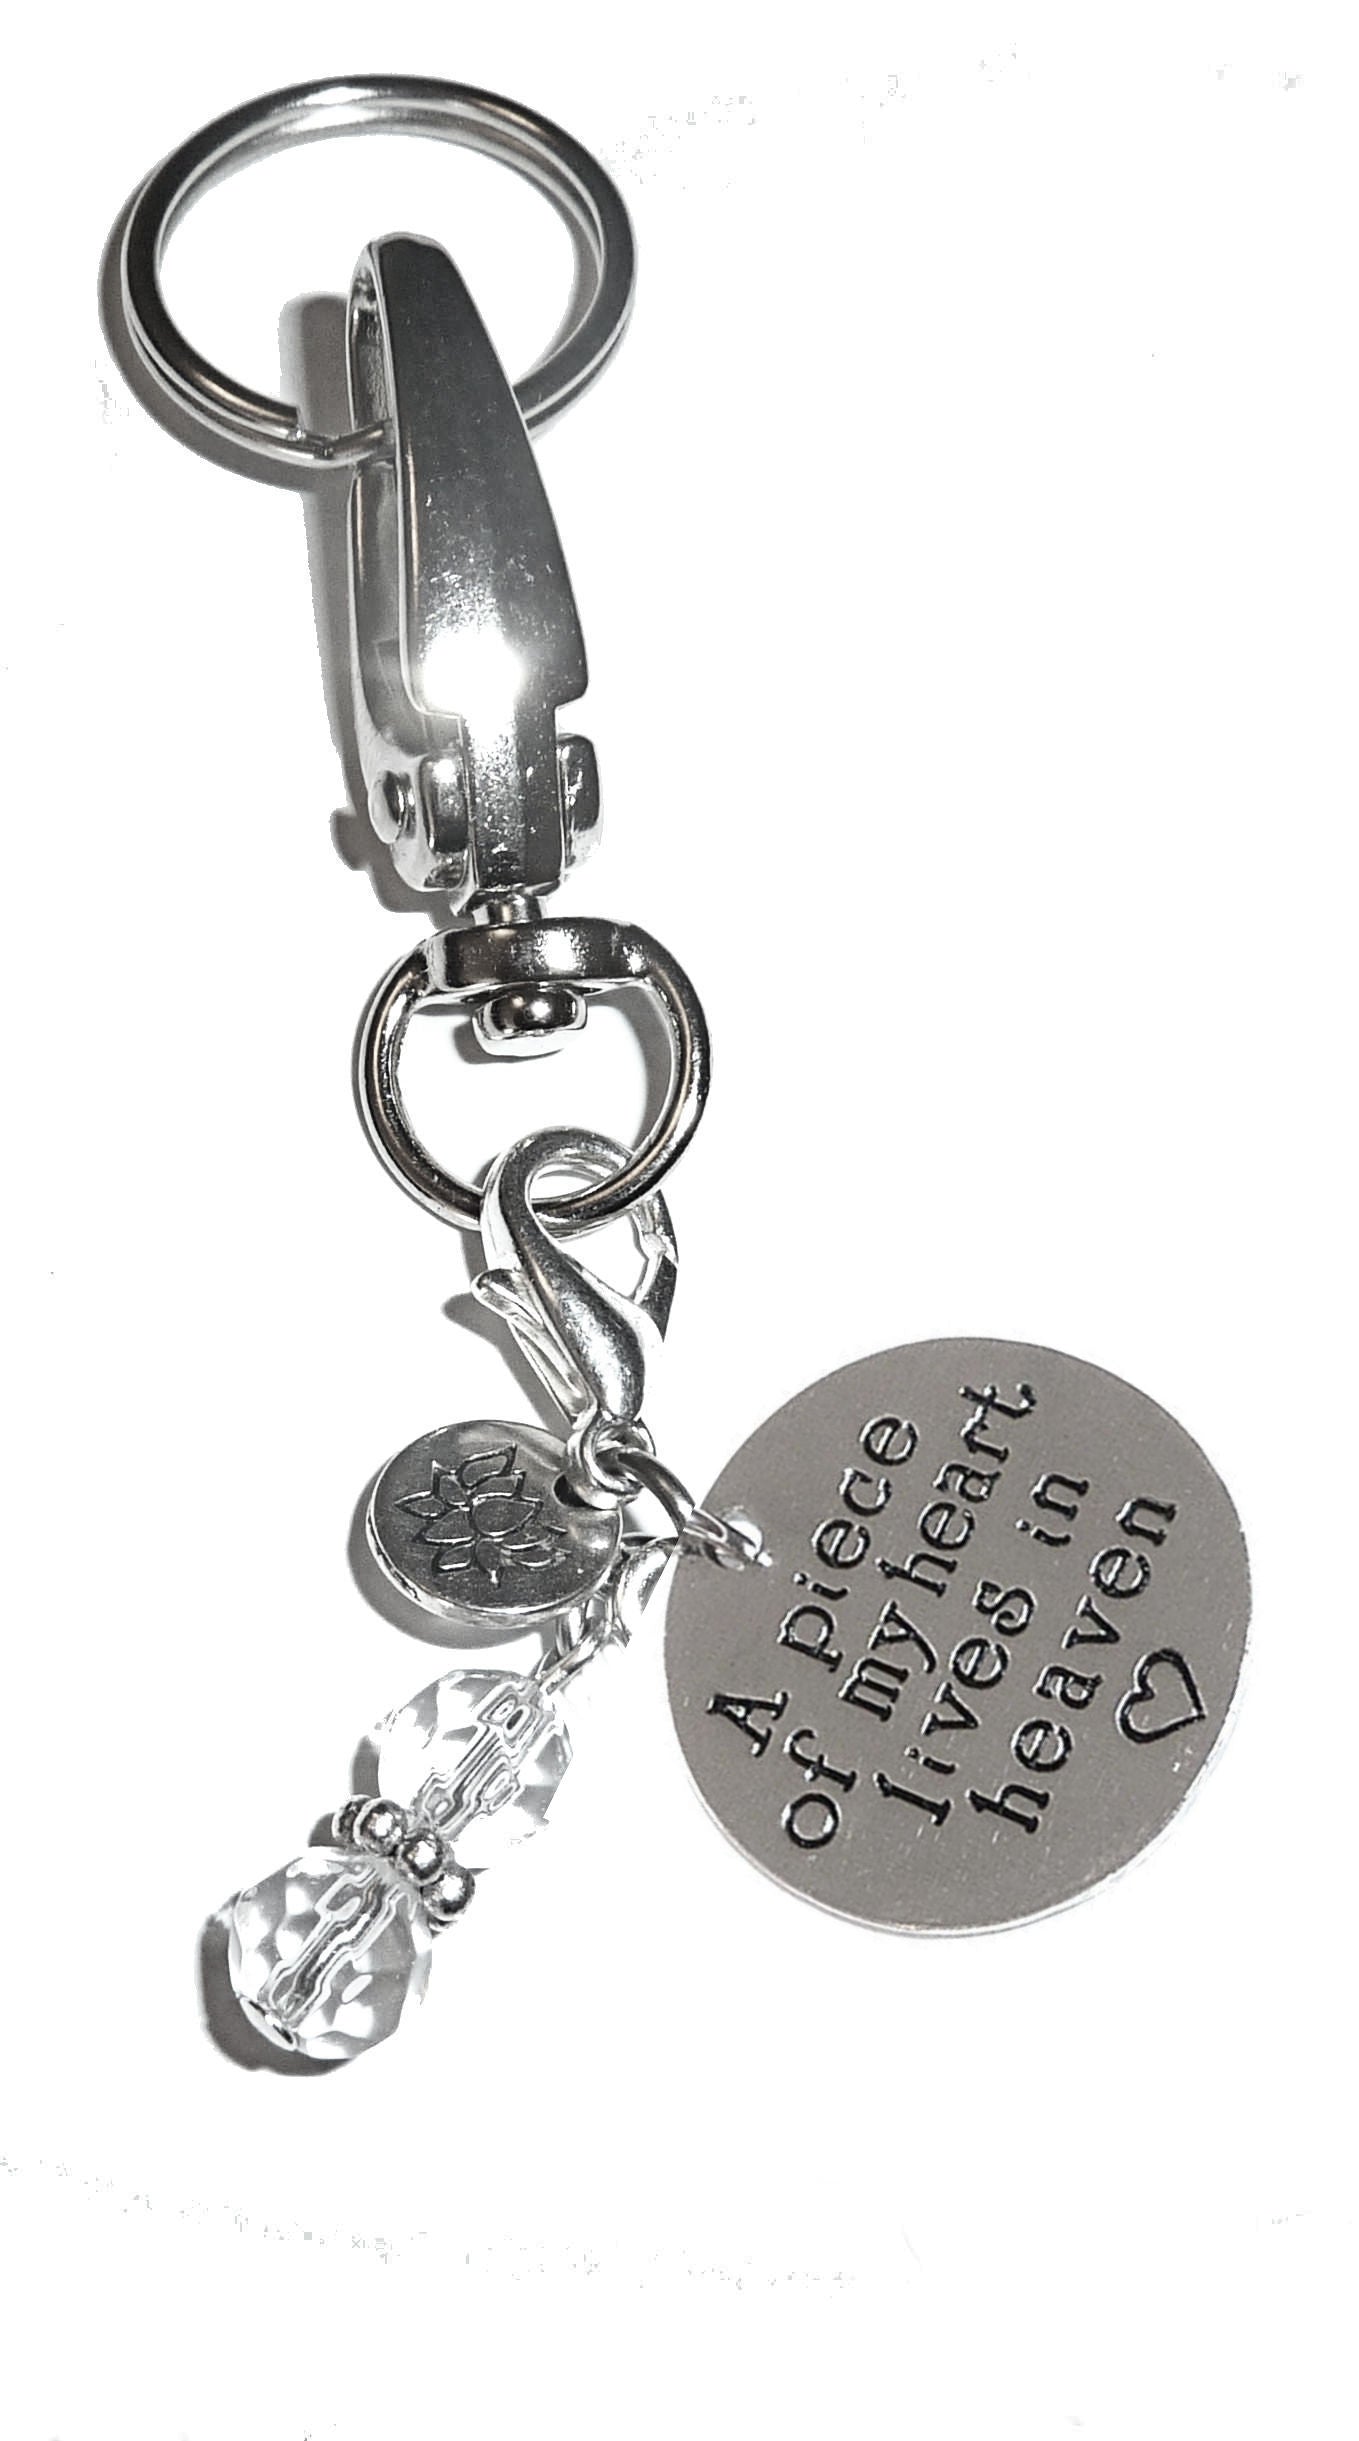 A Piece Of My Heart Keychain Charm - Women's Purse or Necklace Charm - Comes in a Gift Box!